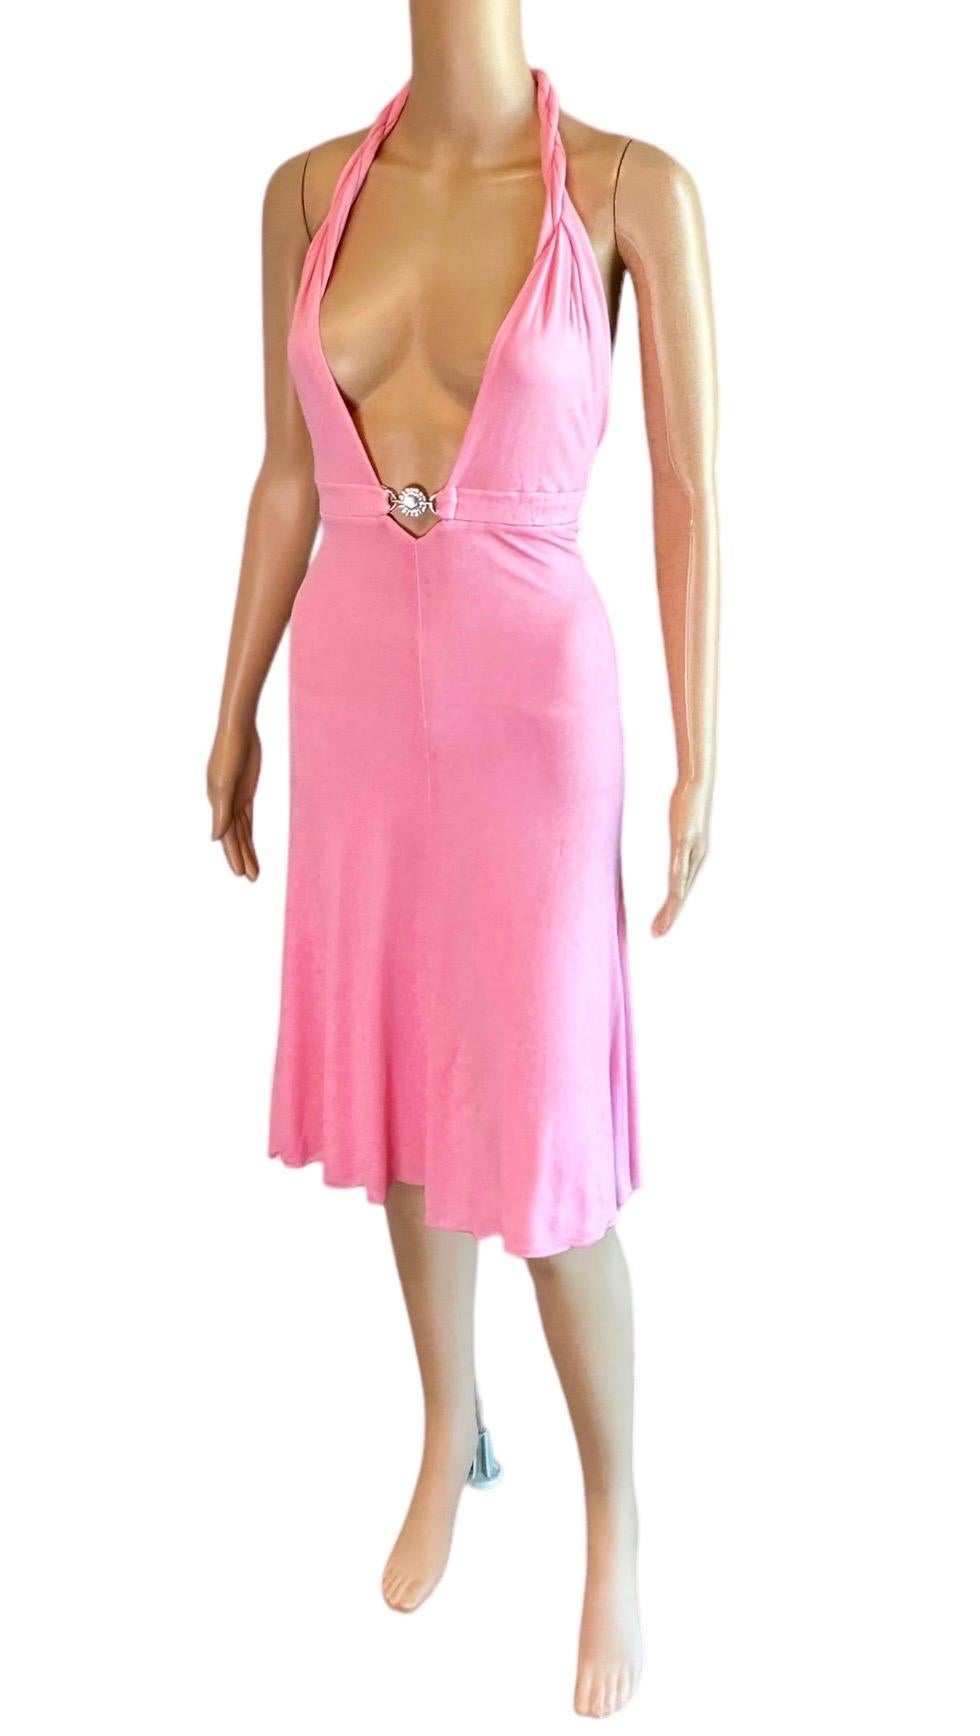 Versace S/S 2007 Crystal Logo Plunging Neckline Backless Halter Pink Dress In Good Condition For Sale In Naples, FL